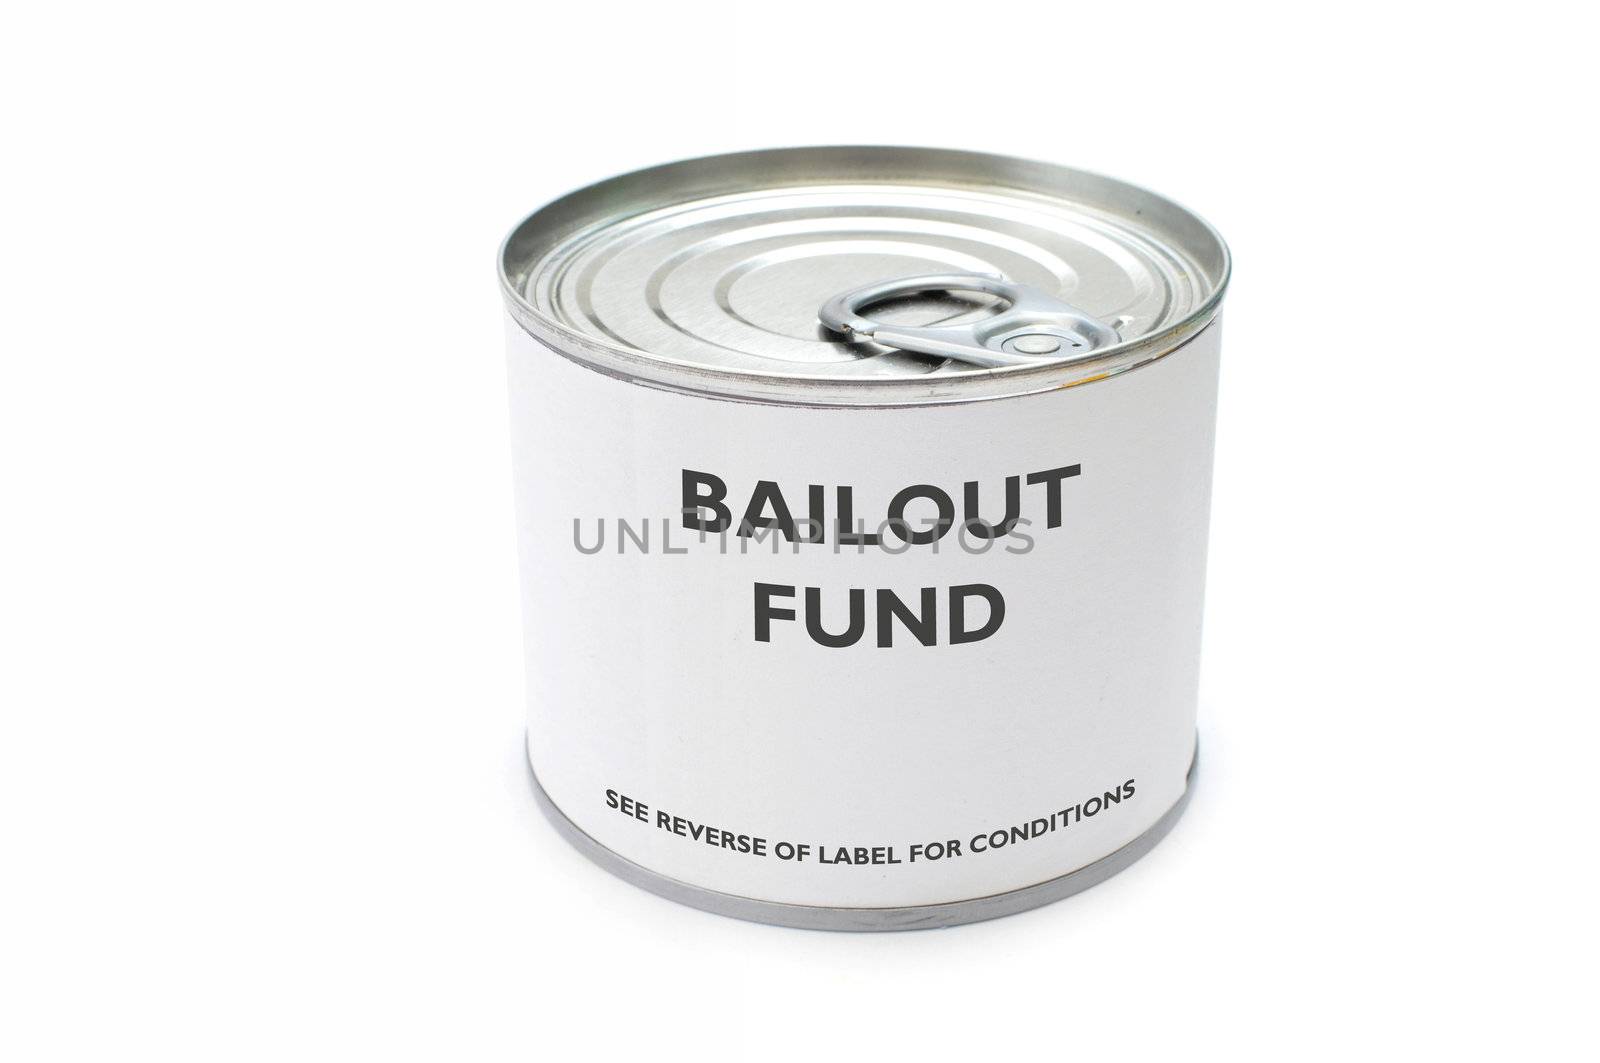 Bailout fund by unikpix